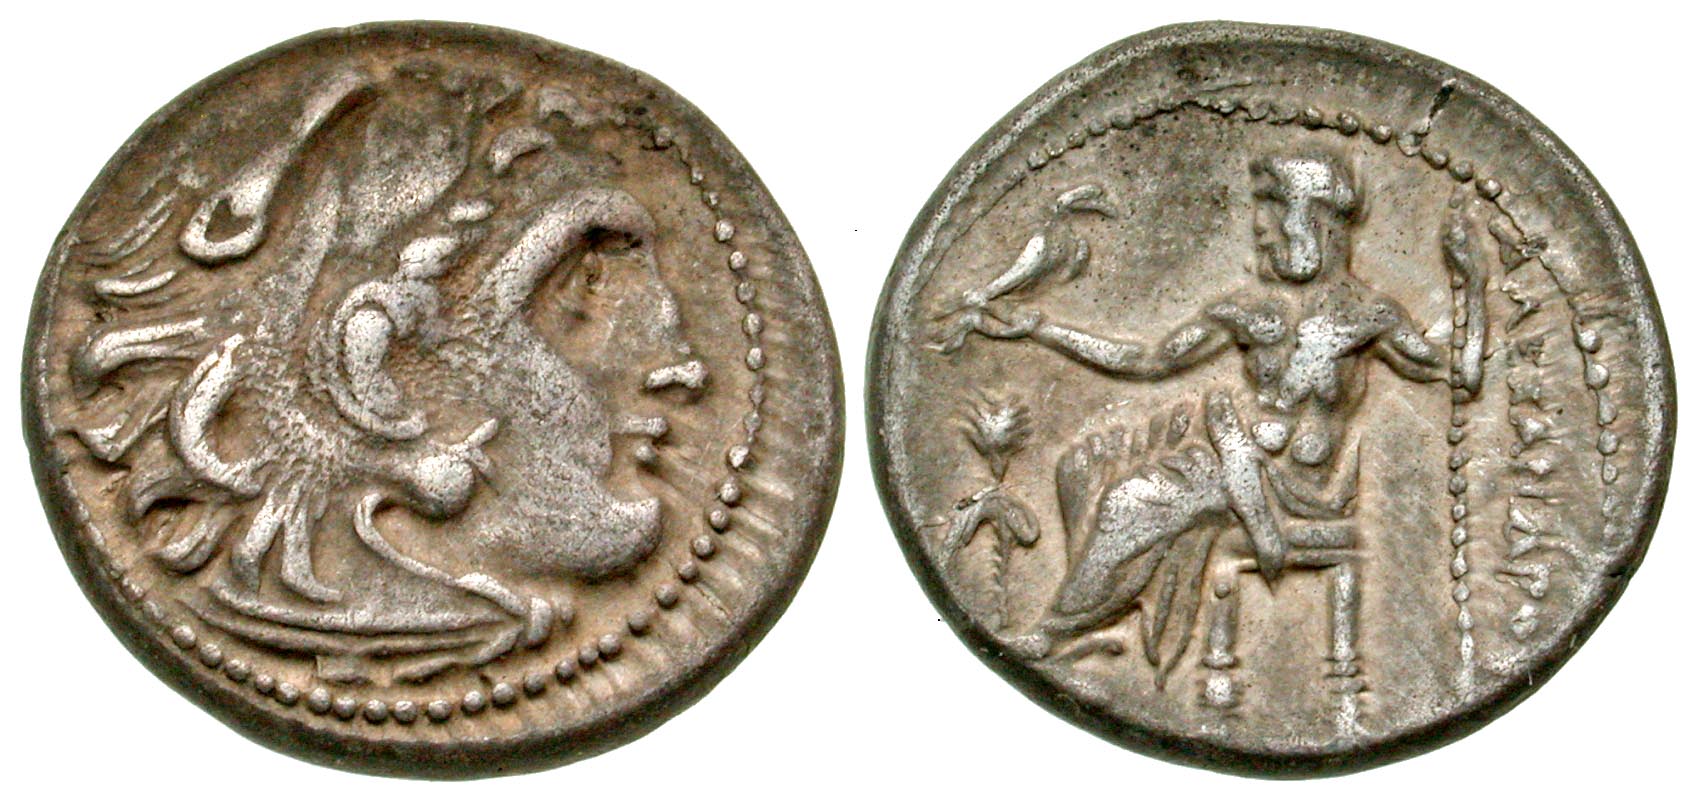 Macedonian Kingdom. Philip III Arrhidaios. 323-317 B.C. AR drachm. in the name of Alexander III, 336-323 B.C.. Magnesia ad Meandrum mint, Struck ca. 323-319 B.C. by authority of Menander or Kleitos. 